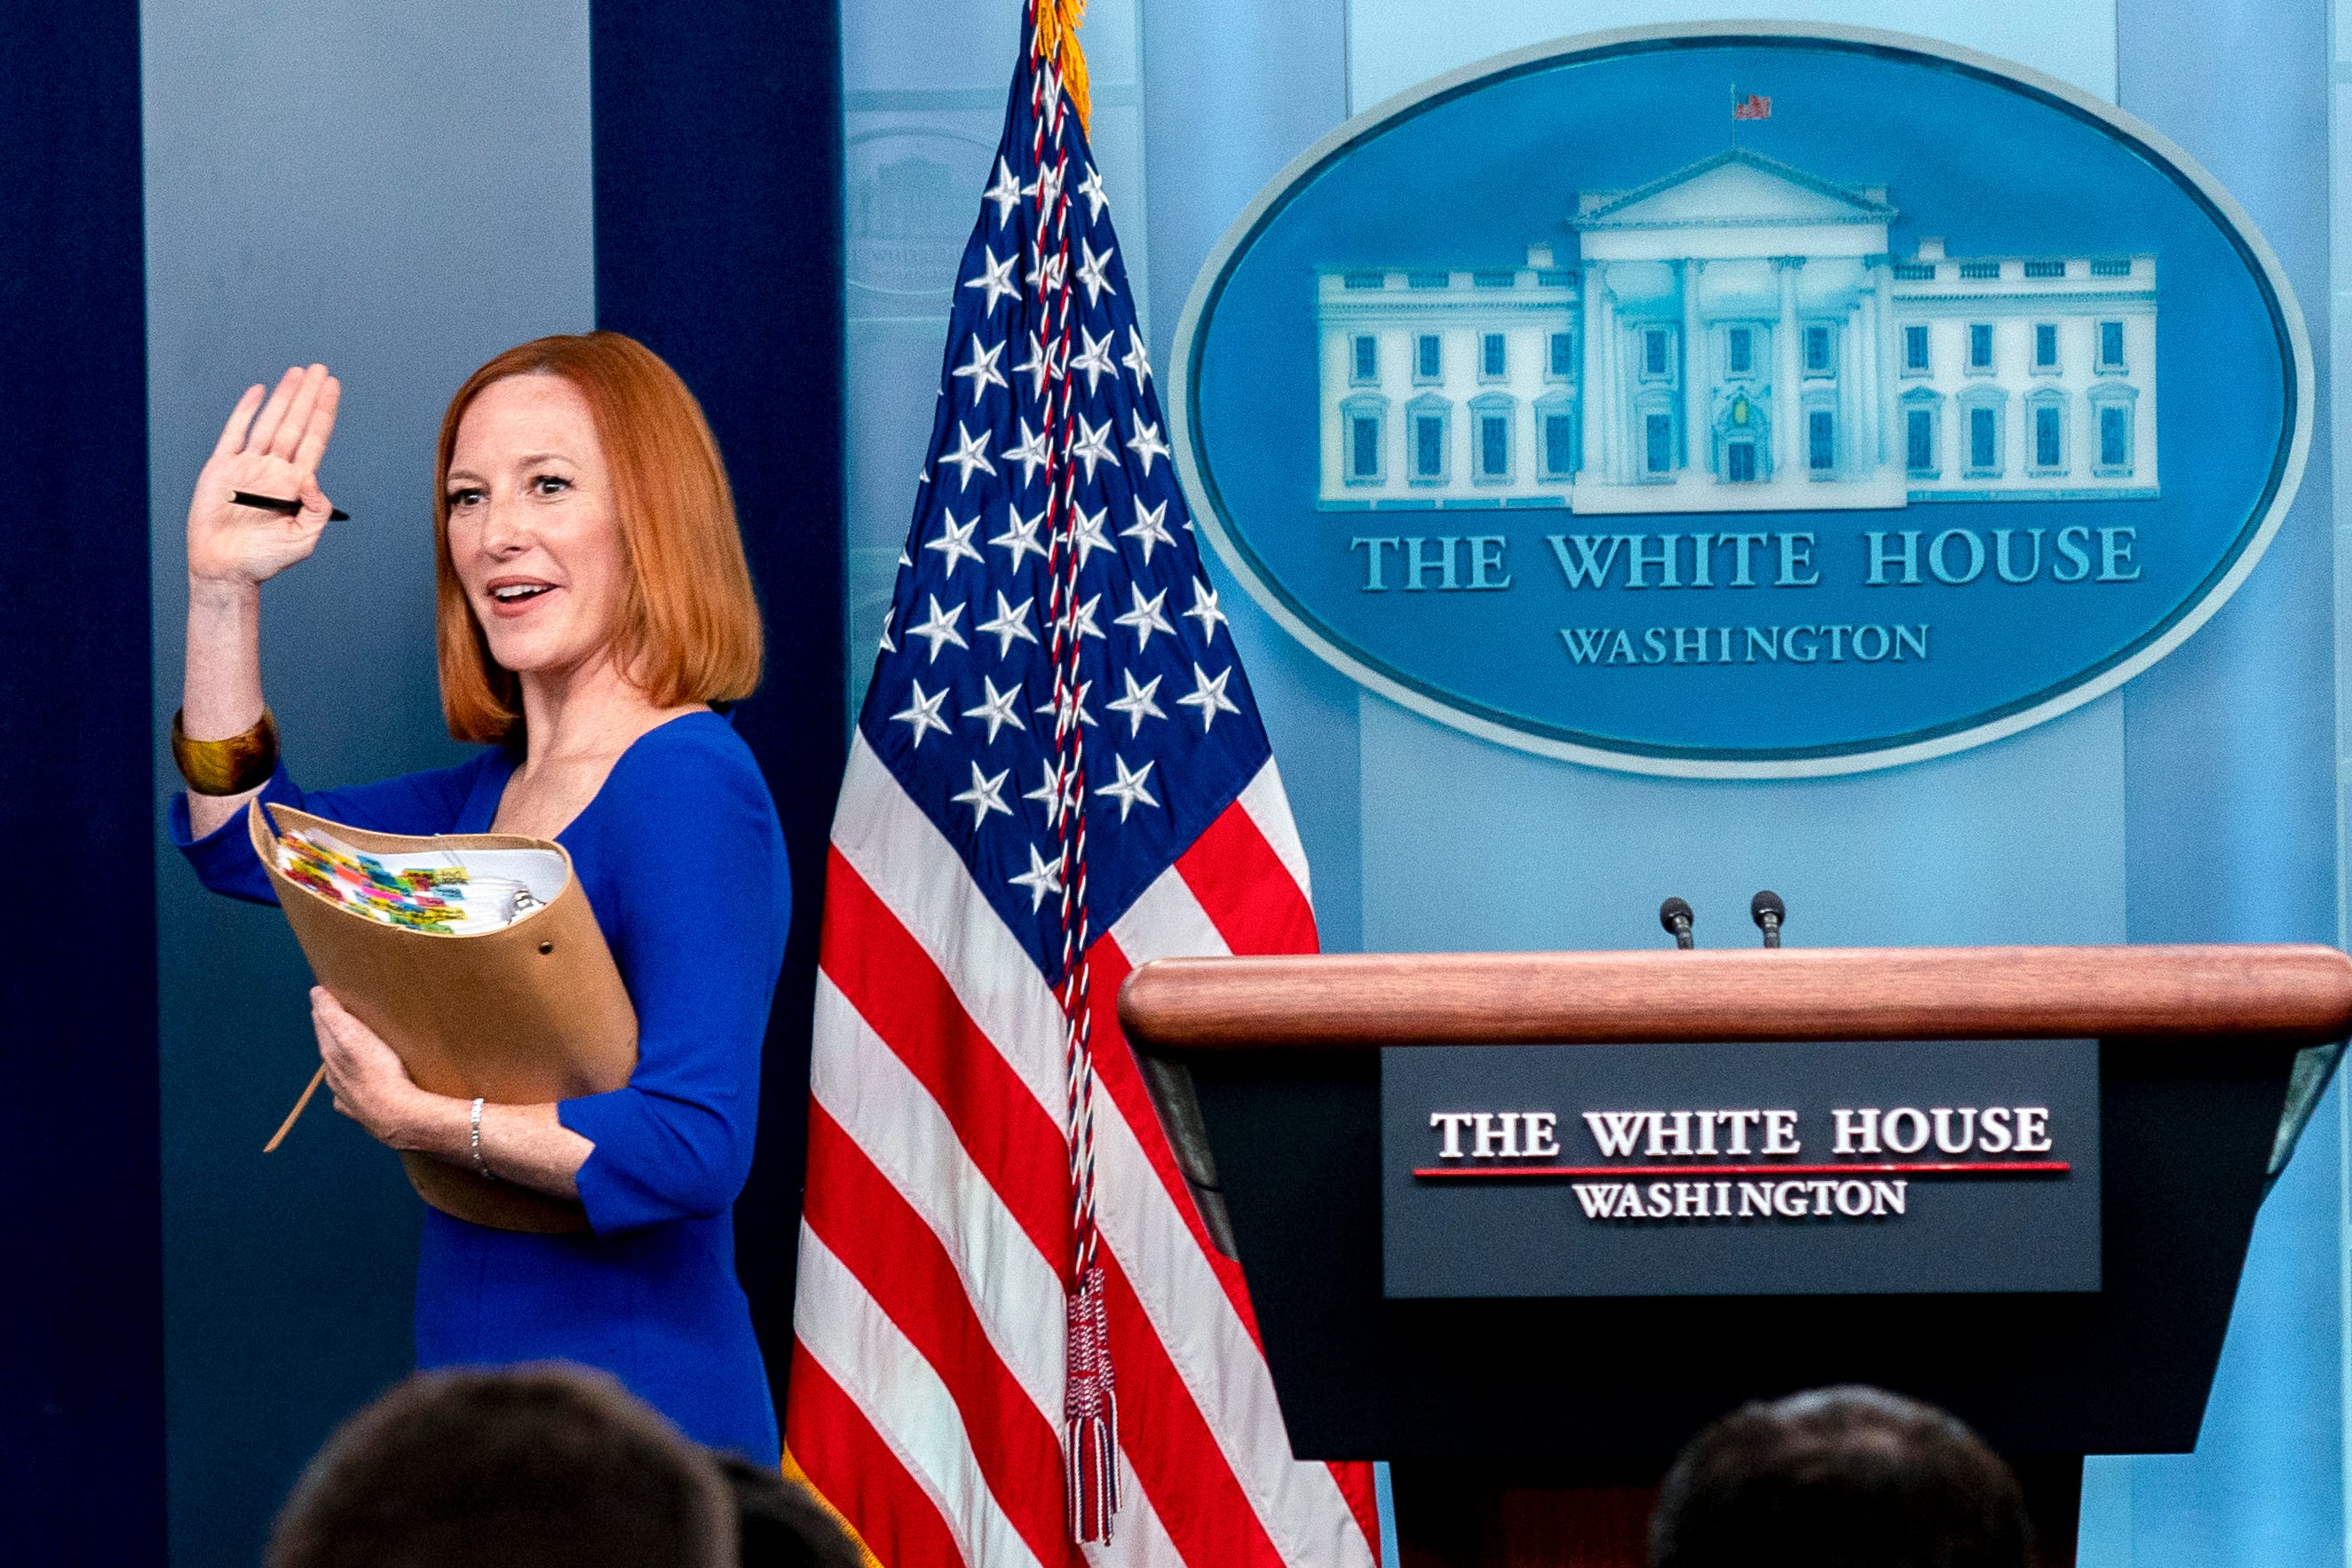 Why jen psaki will be missed as white house press secretary. it's 'the end of an era'